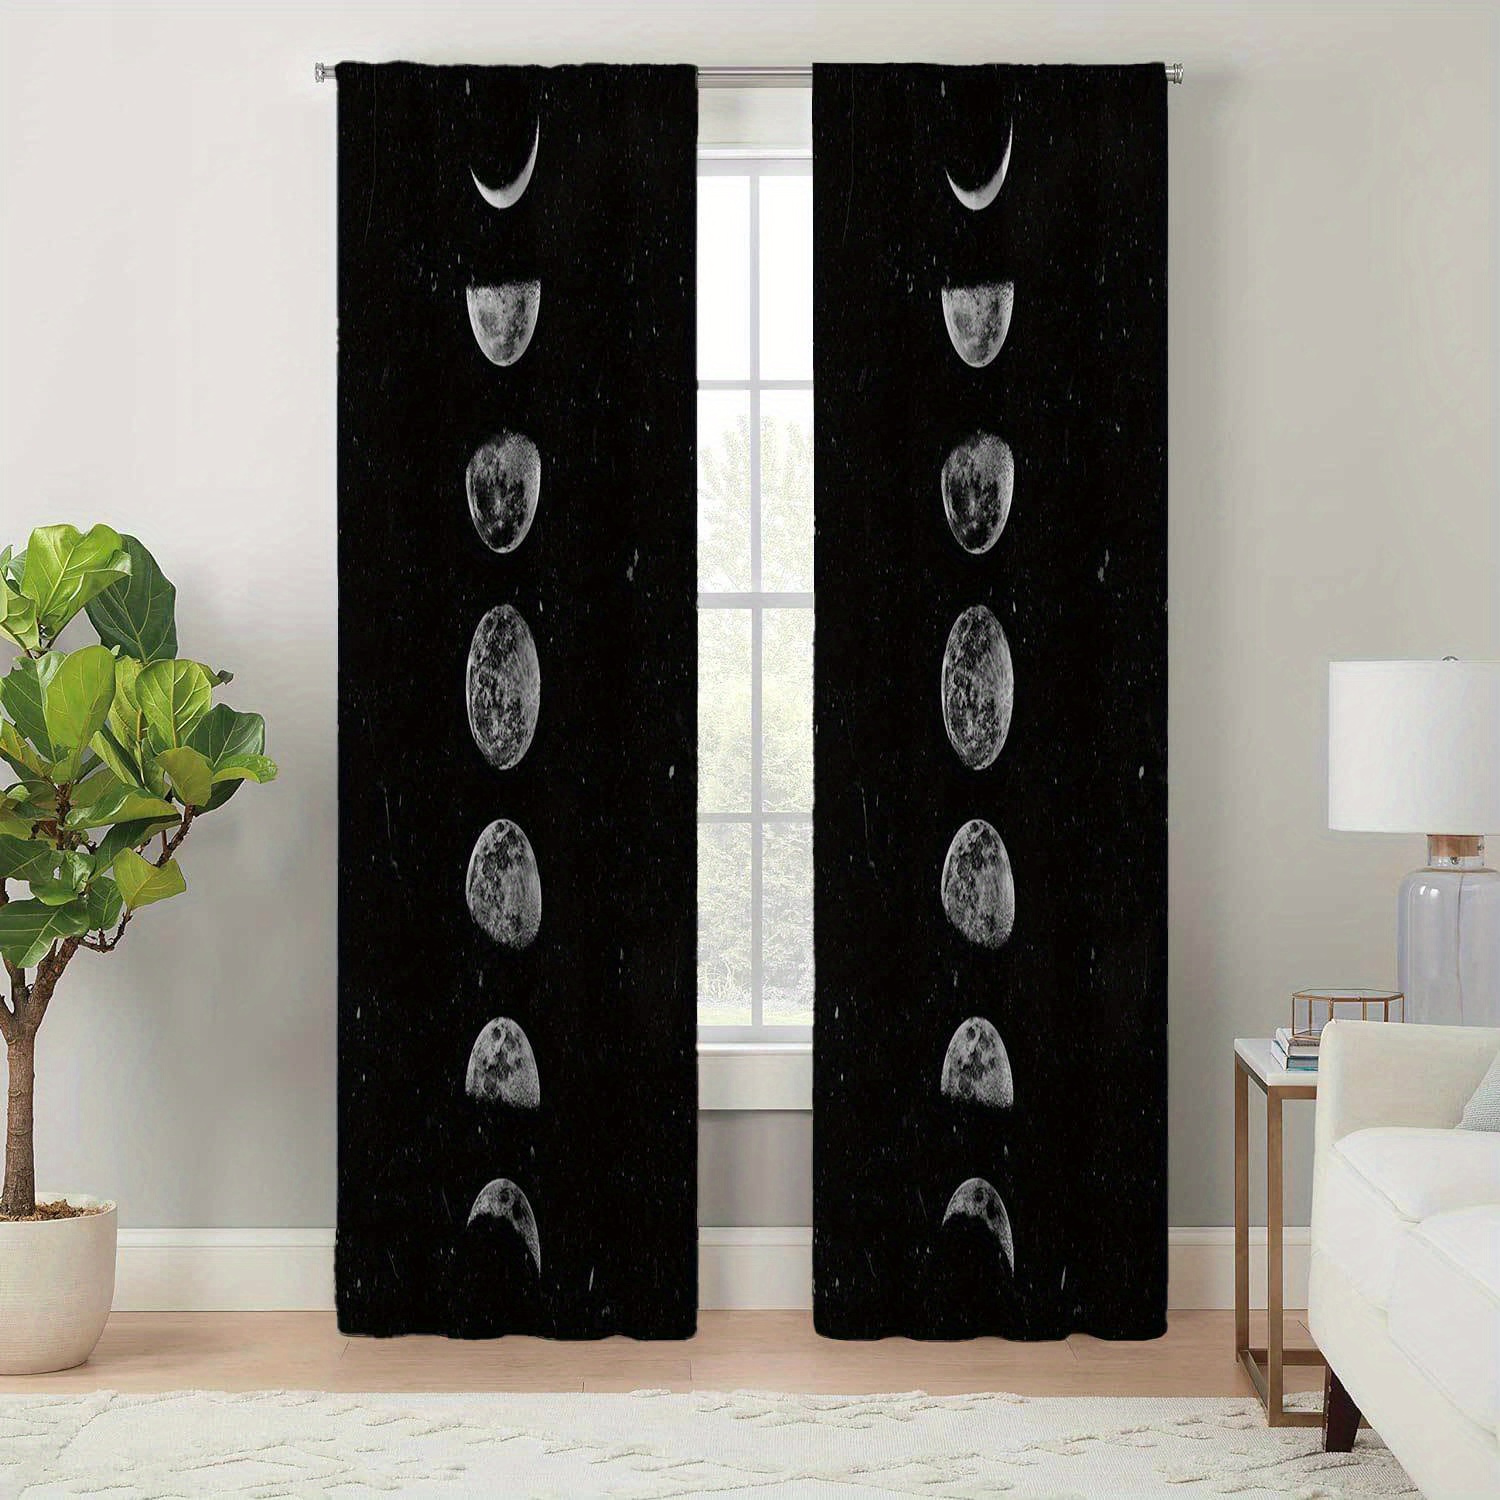 

2pcs/set, Modern Minimalist Style Living Room Decor Curtains, Moon Phase Pattern Printed Curtains, Easy Care, 4 Seasons Charm, Durable And Easy To Hang For Home Decor